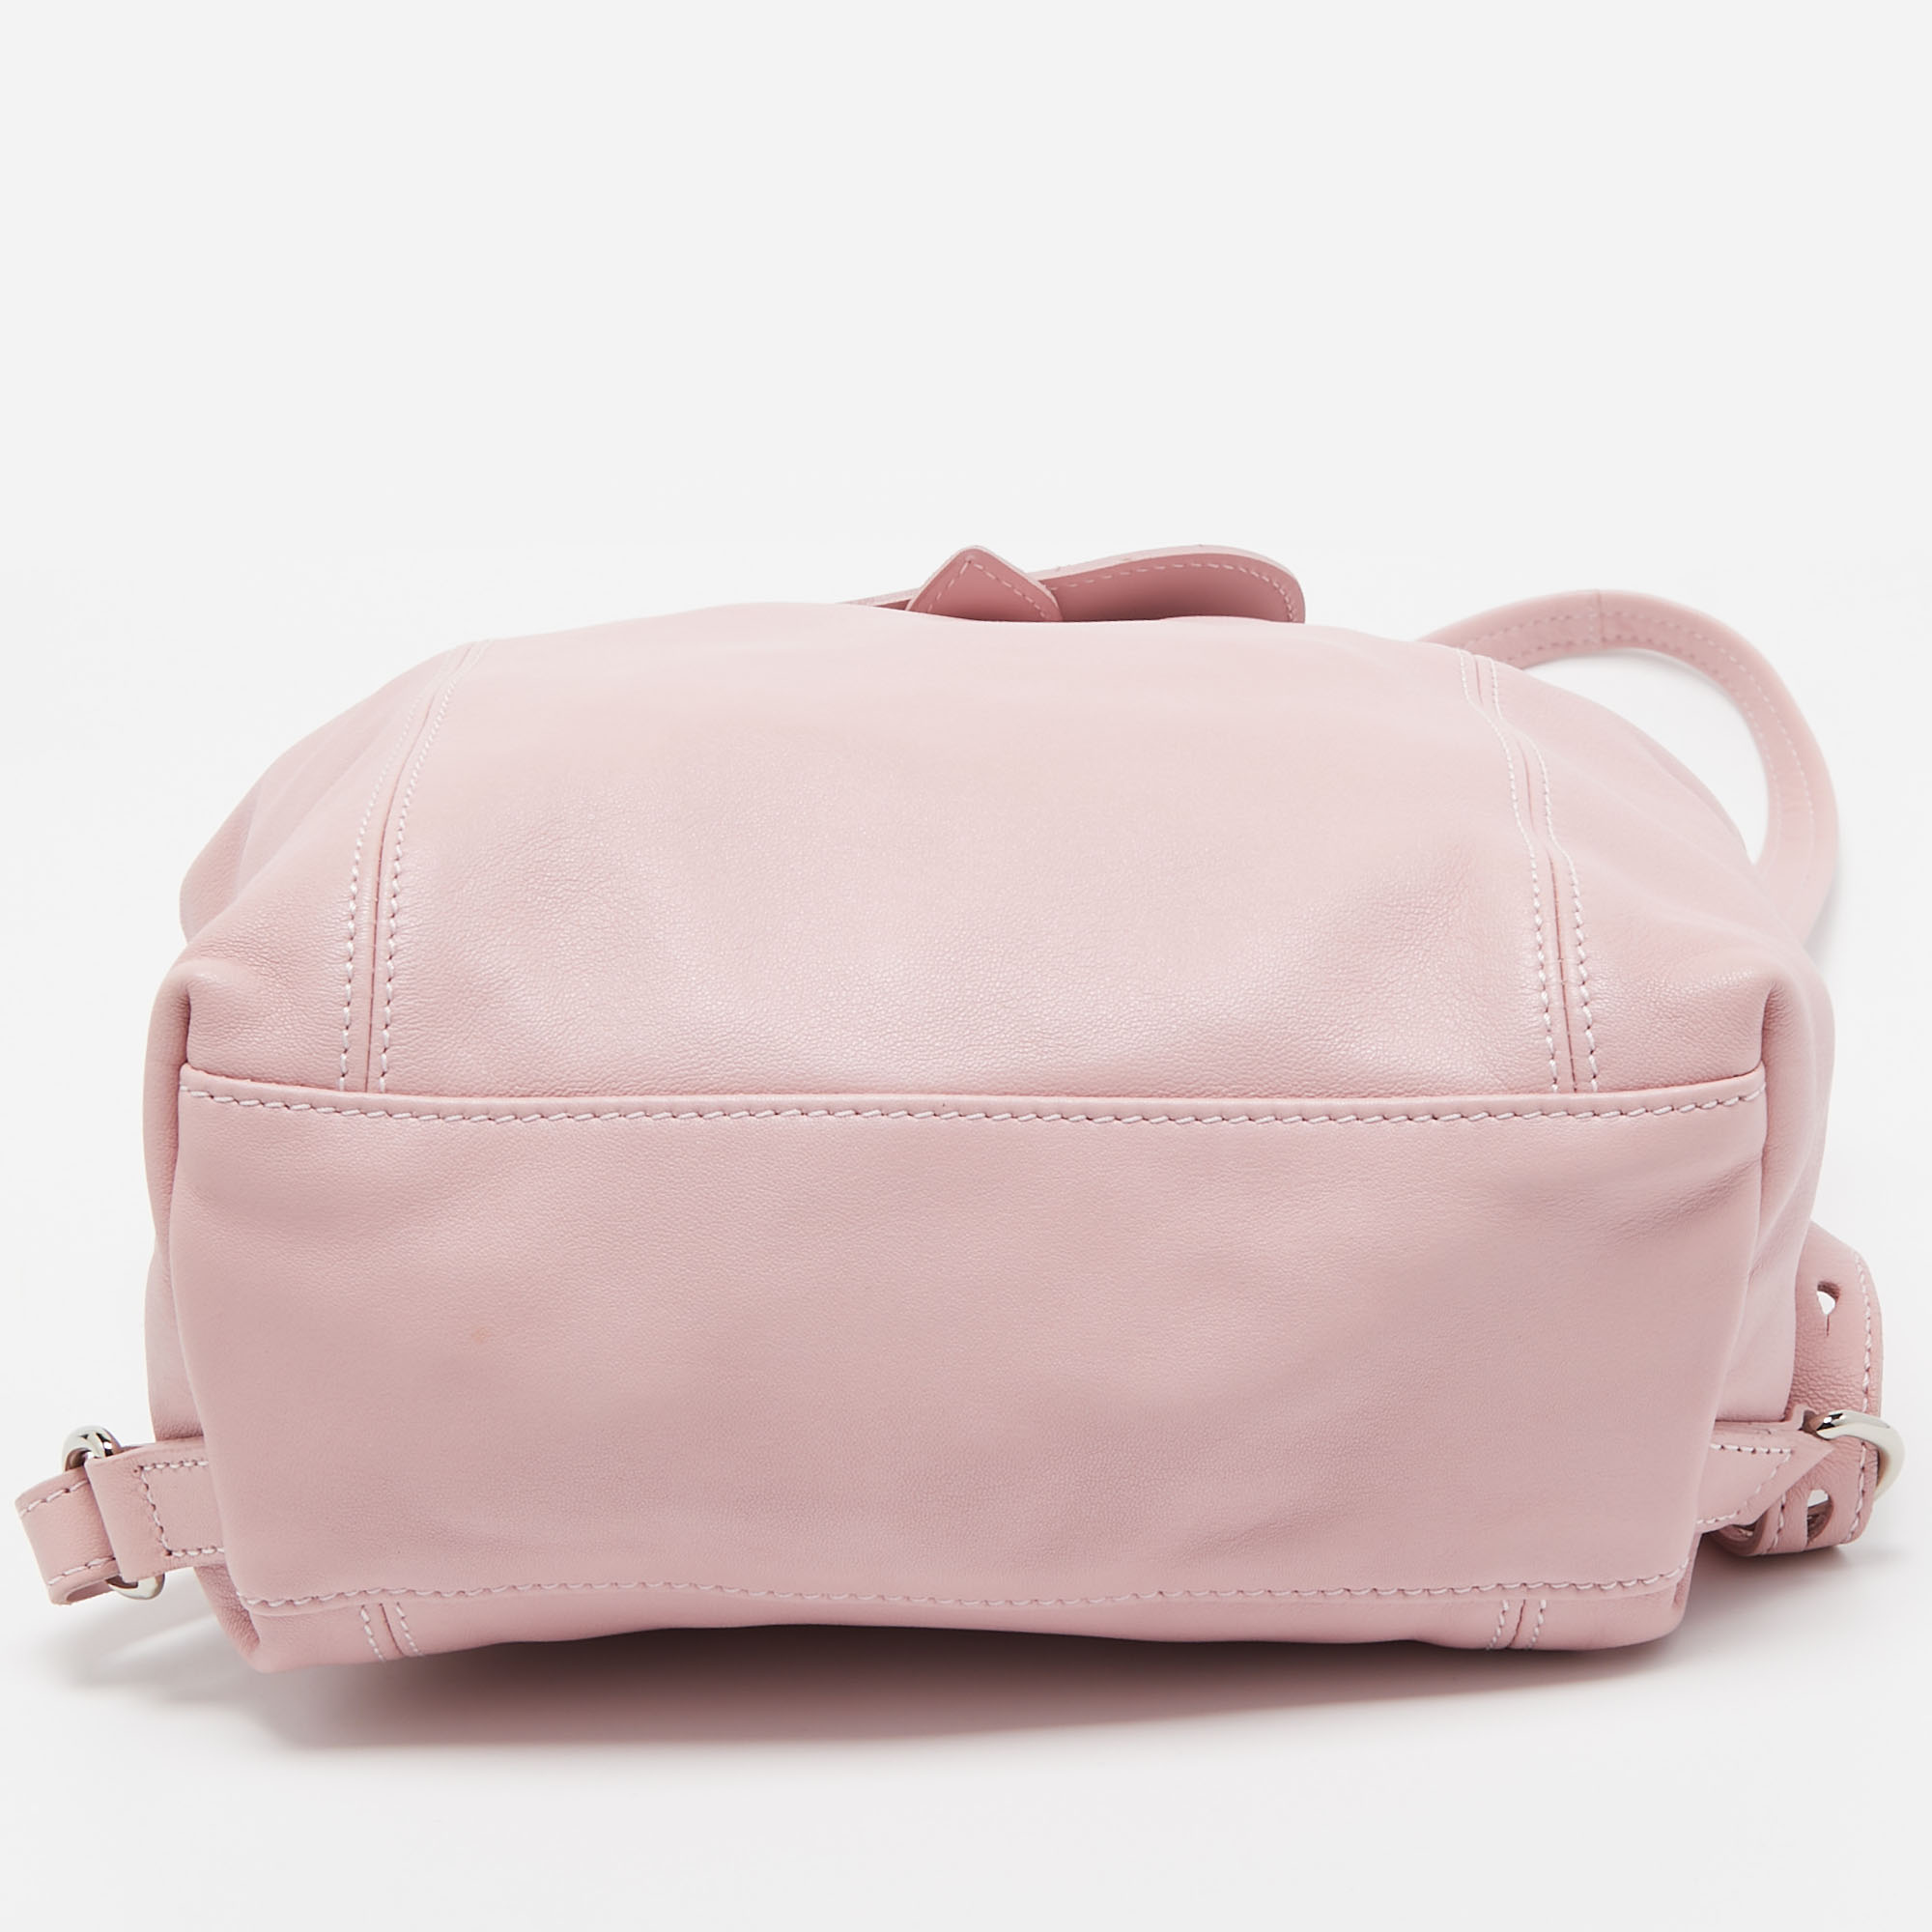 Longchamp Pink Leather Le Pliage Backpack